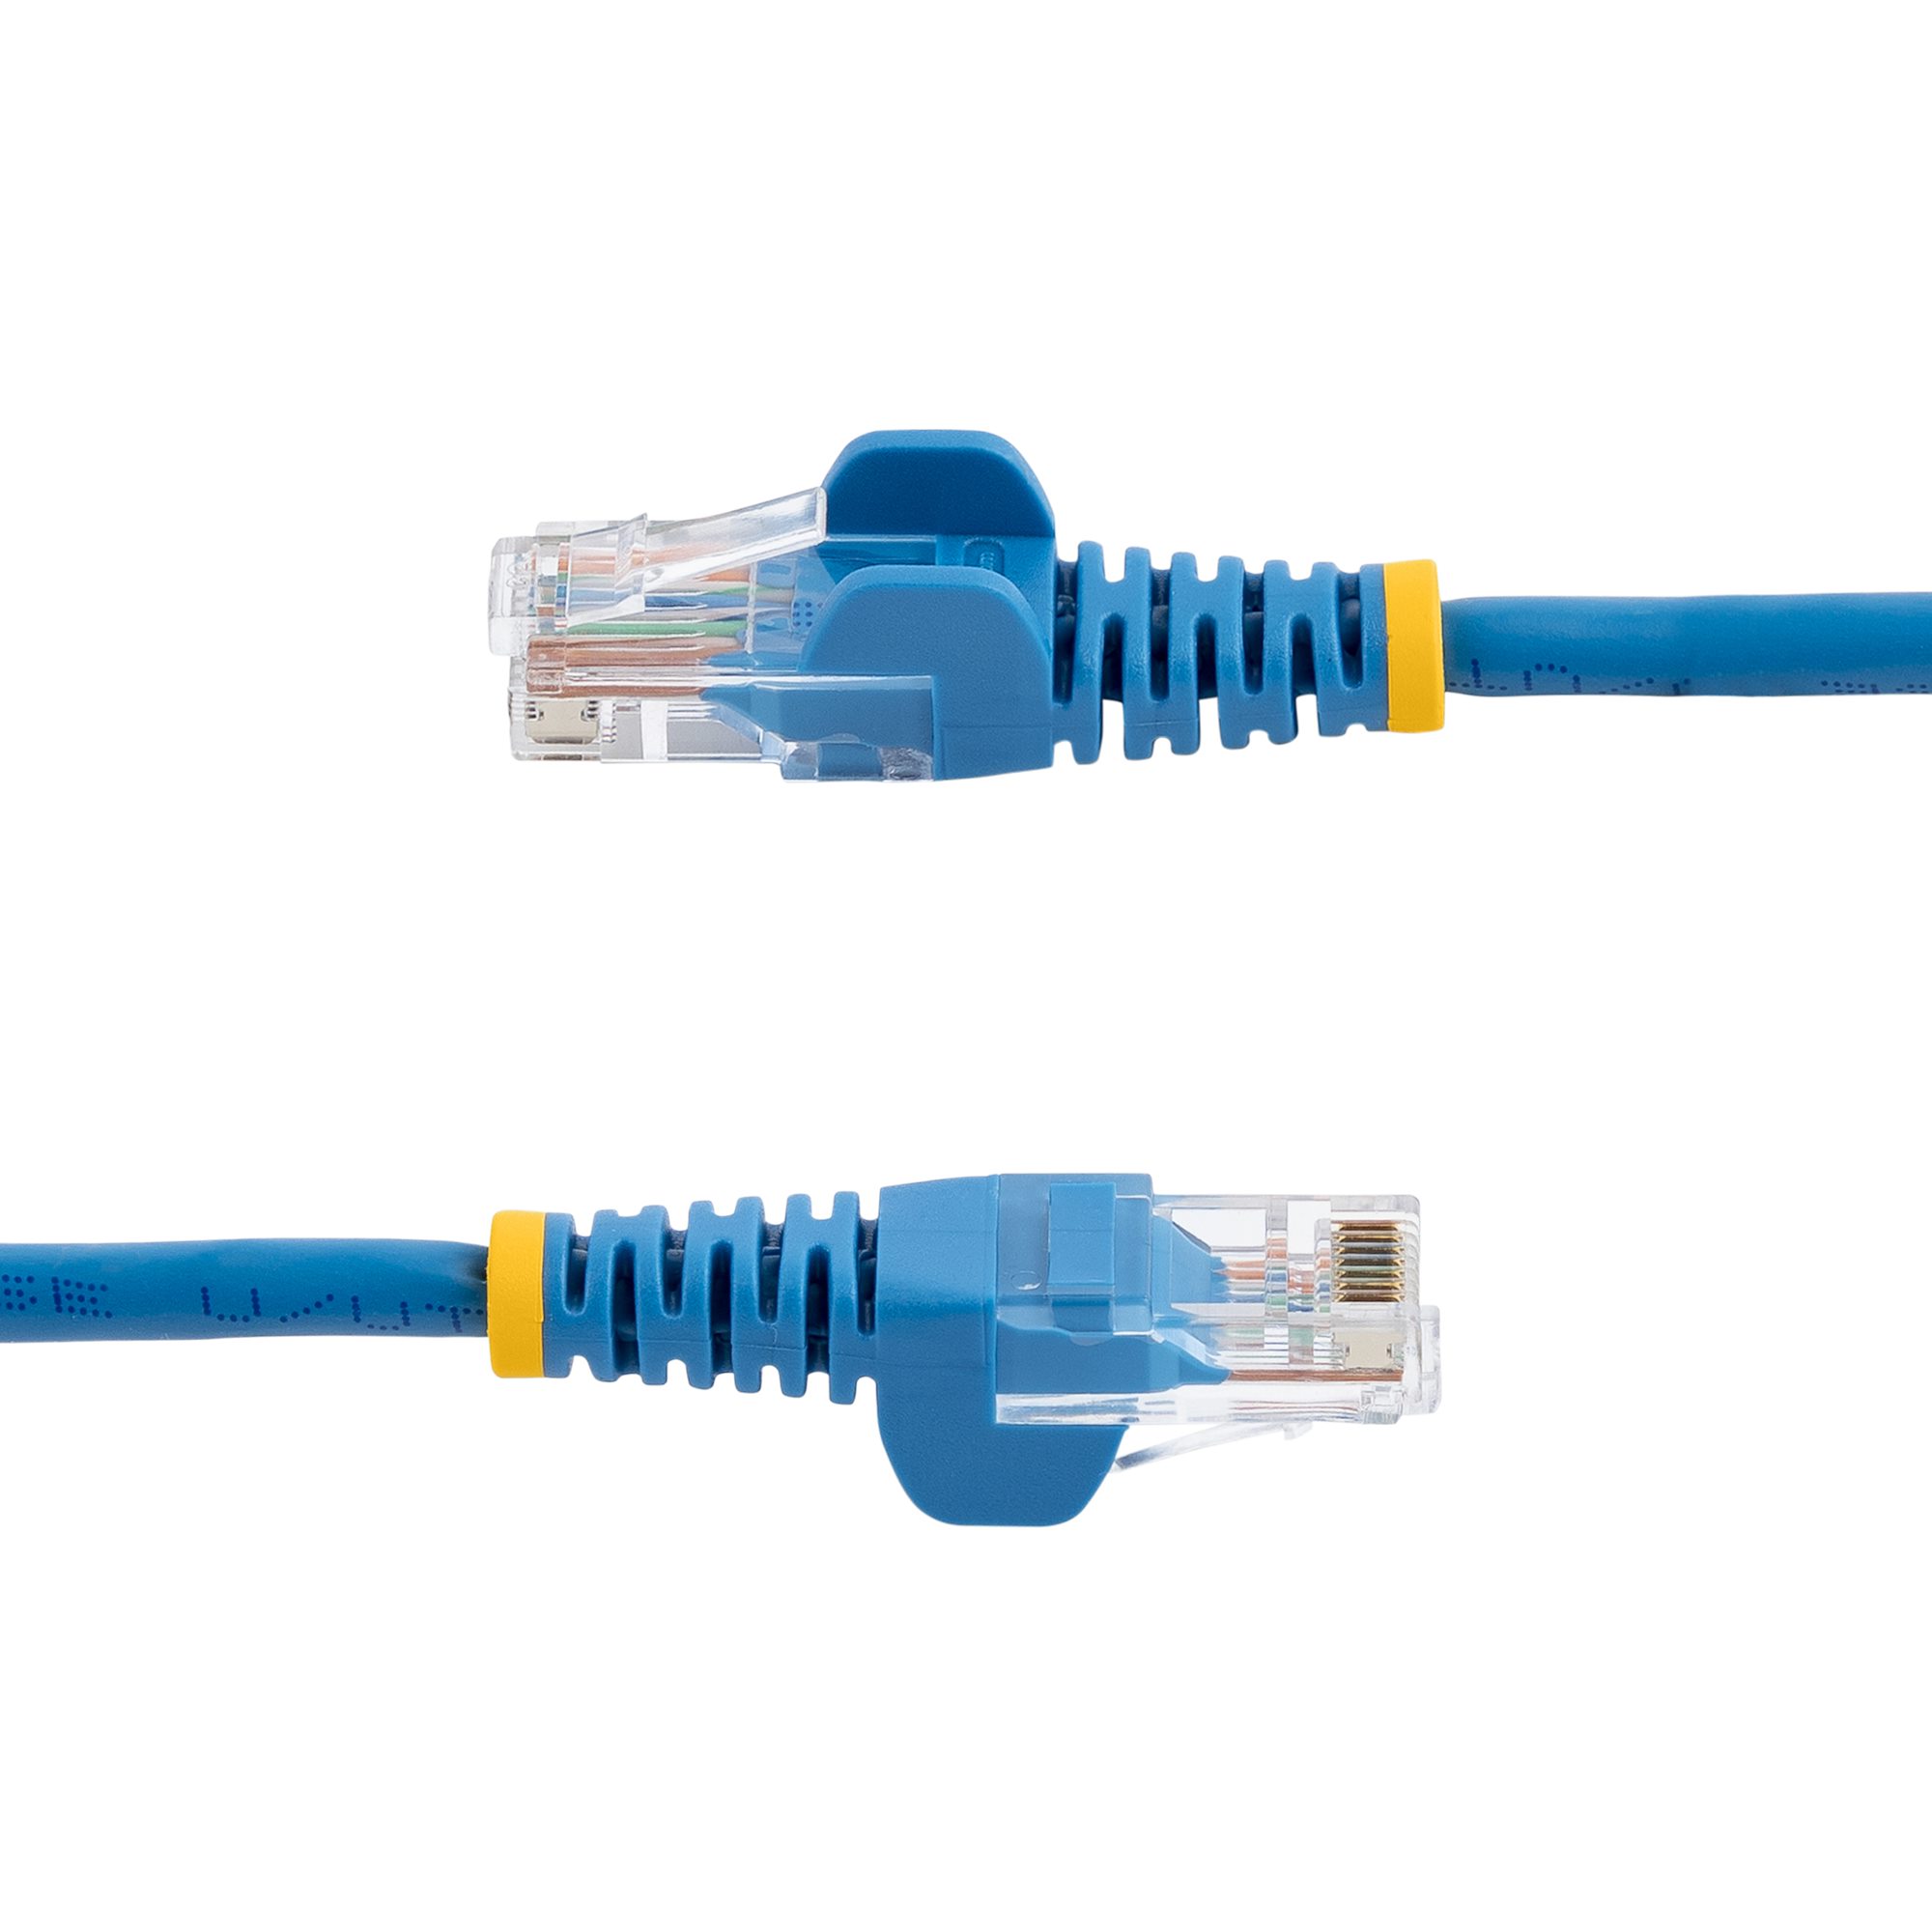 Cat5e Patch Cable with Snagless RJ45 Connectors - 20 ft, Blue